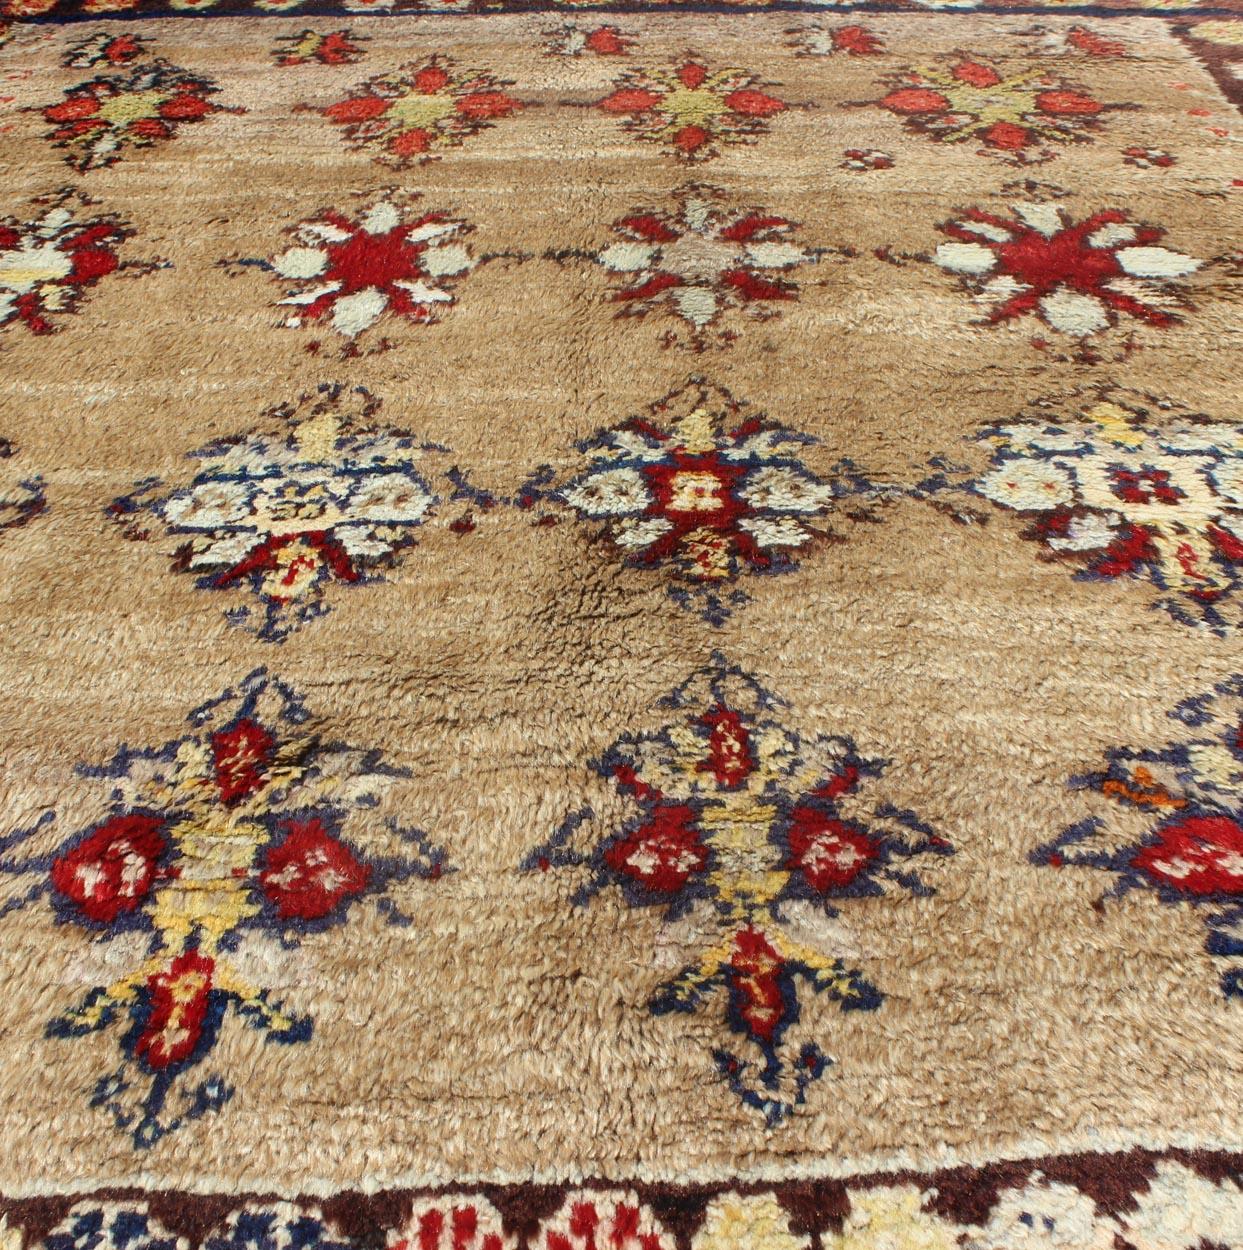 Angora Turkish Tulu Carpet with Colorful Floral Designs Set on Sand Field For Sale 4